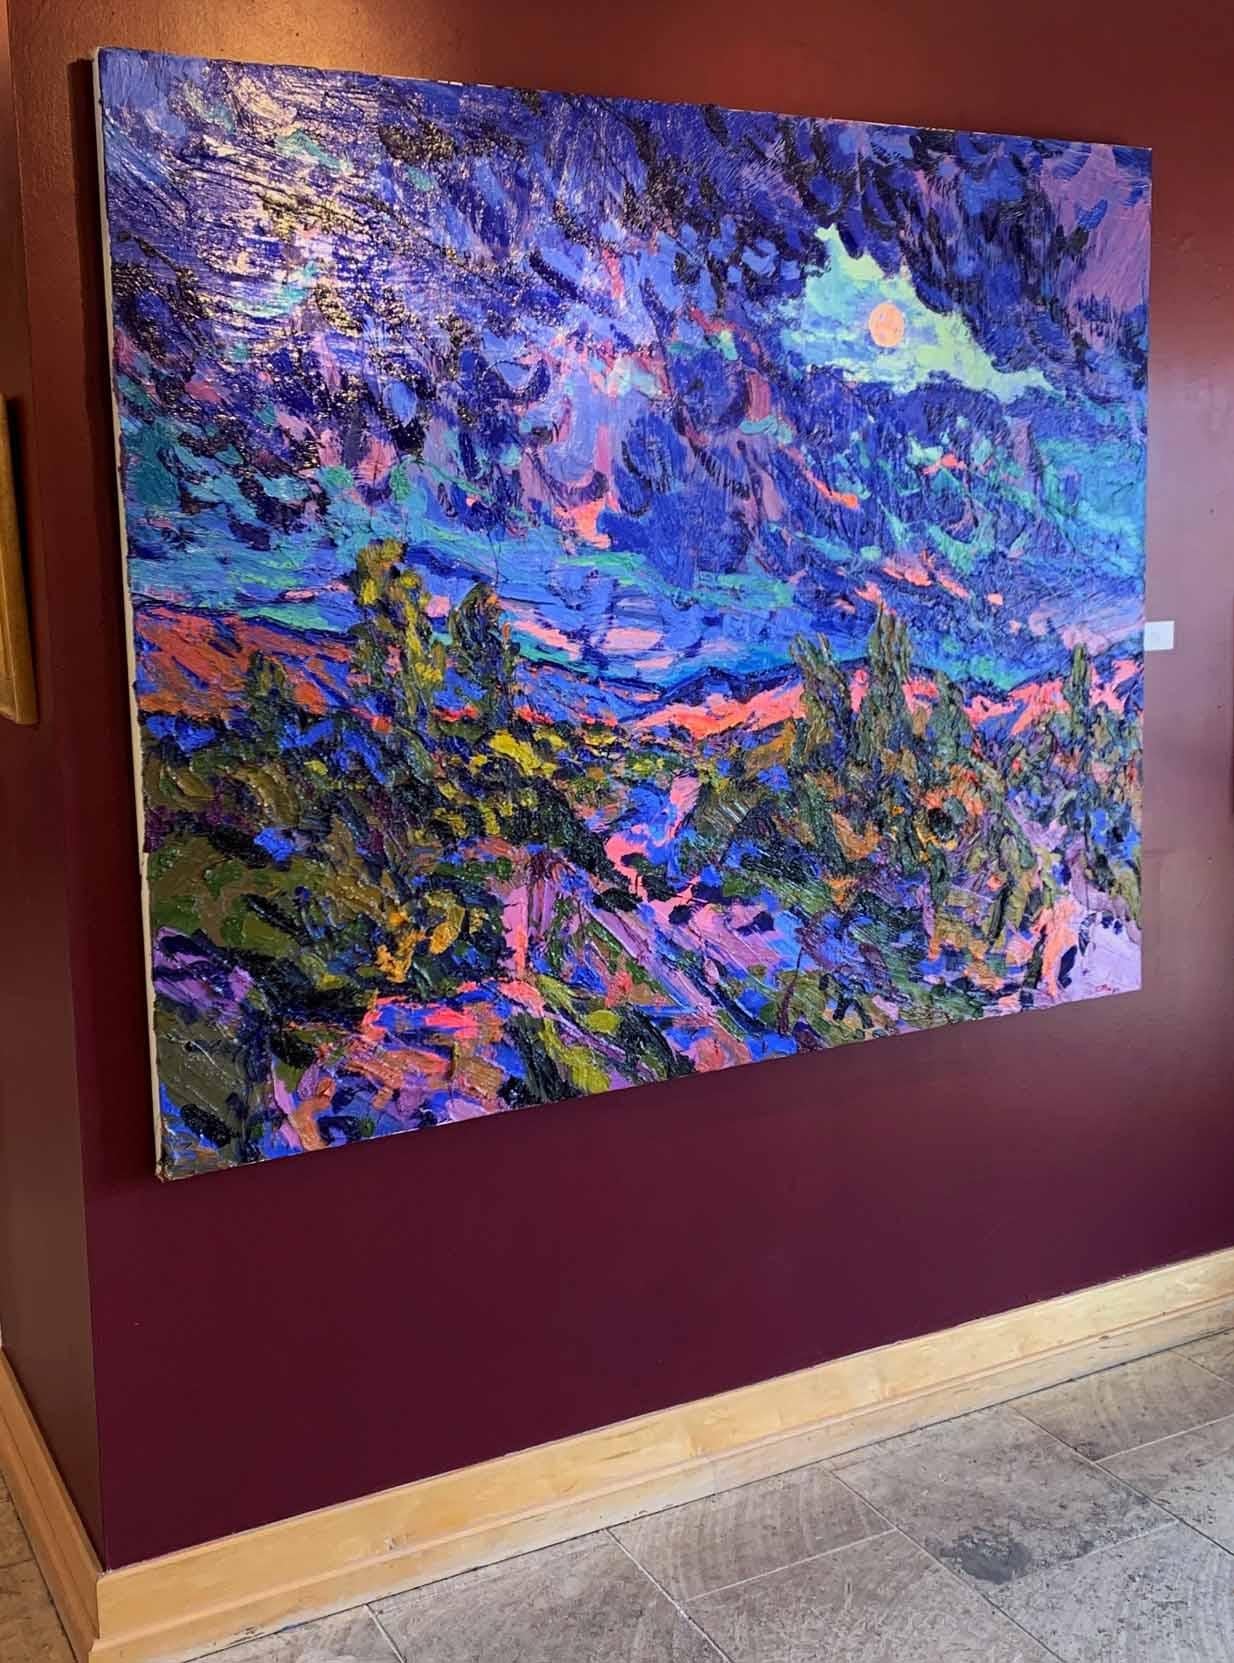 One of the emerging talents of abstract impressionism in the Southwest. 